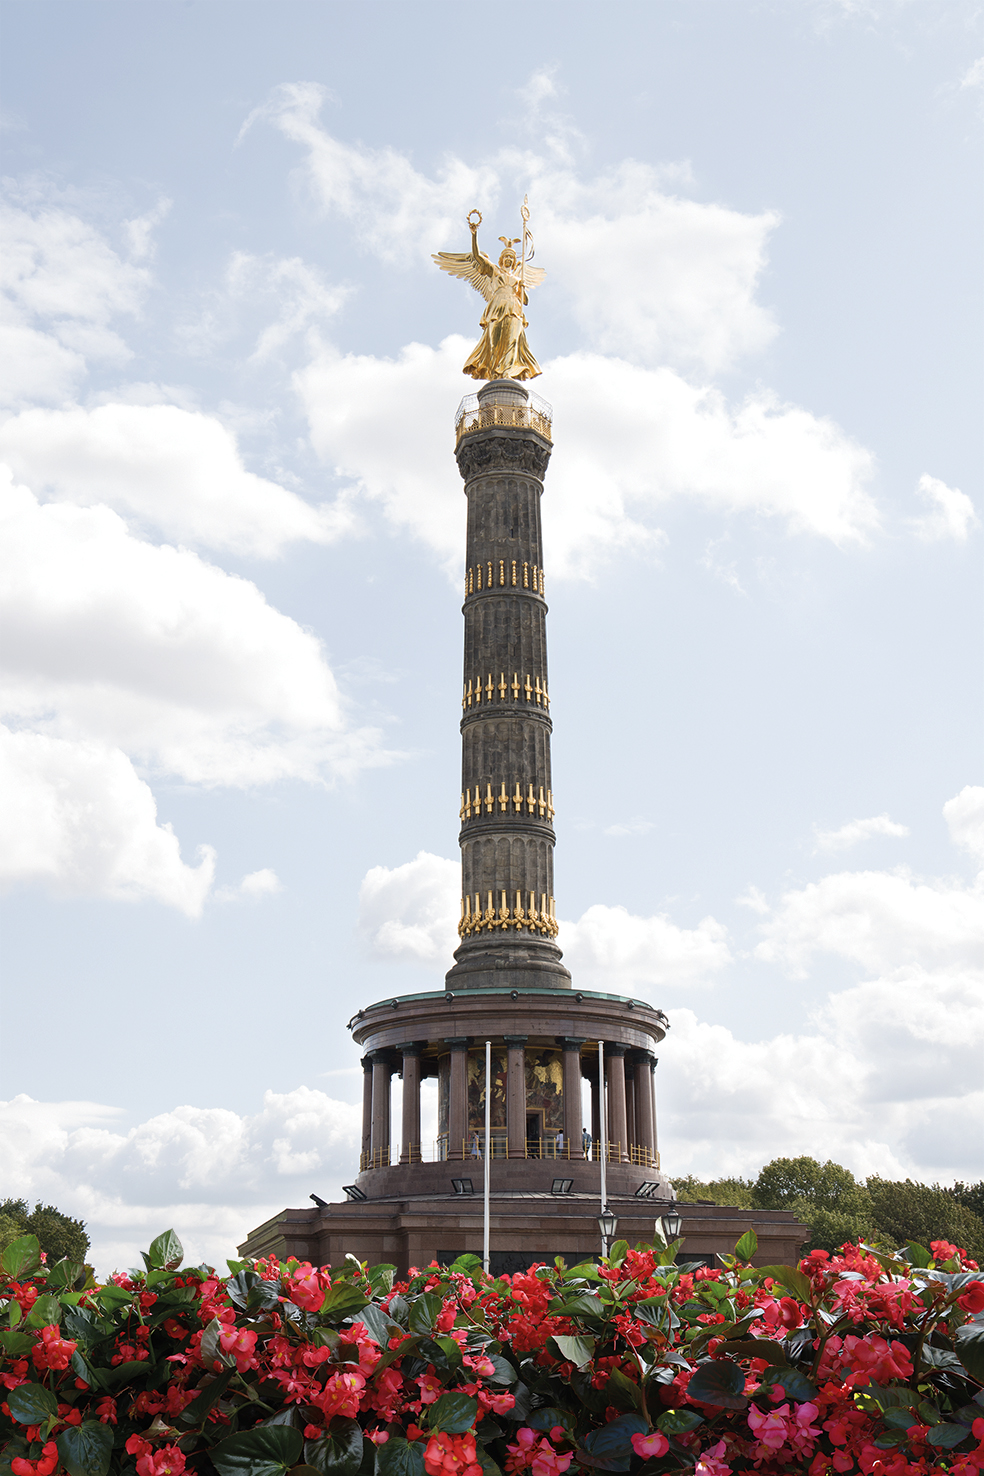 BIGs in front of the Siegessäule 